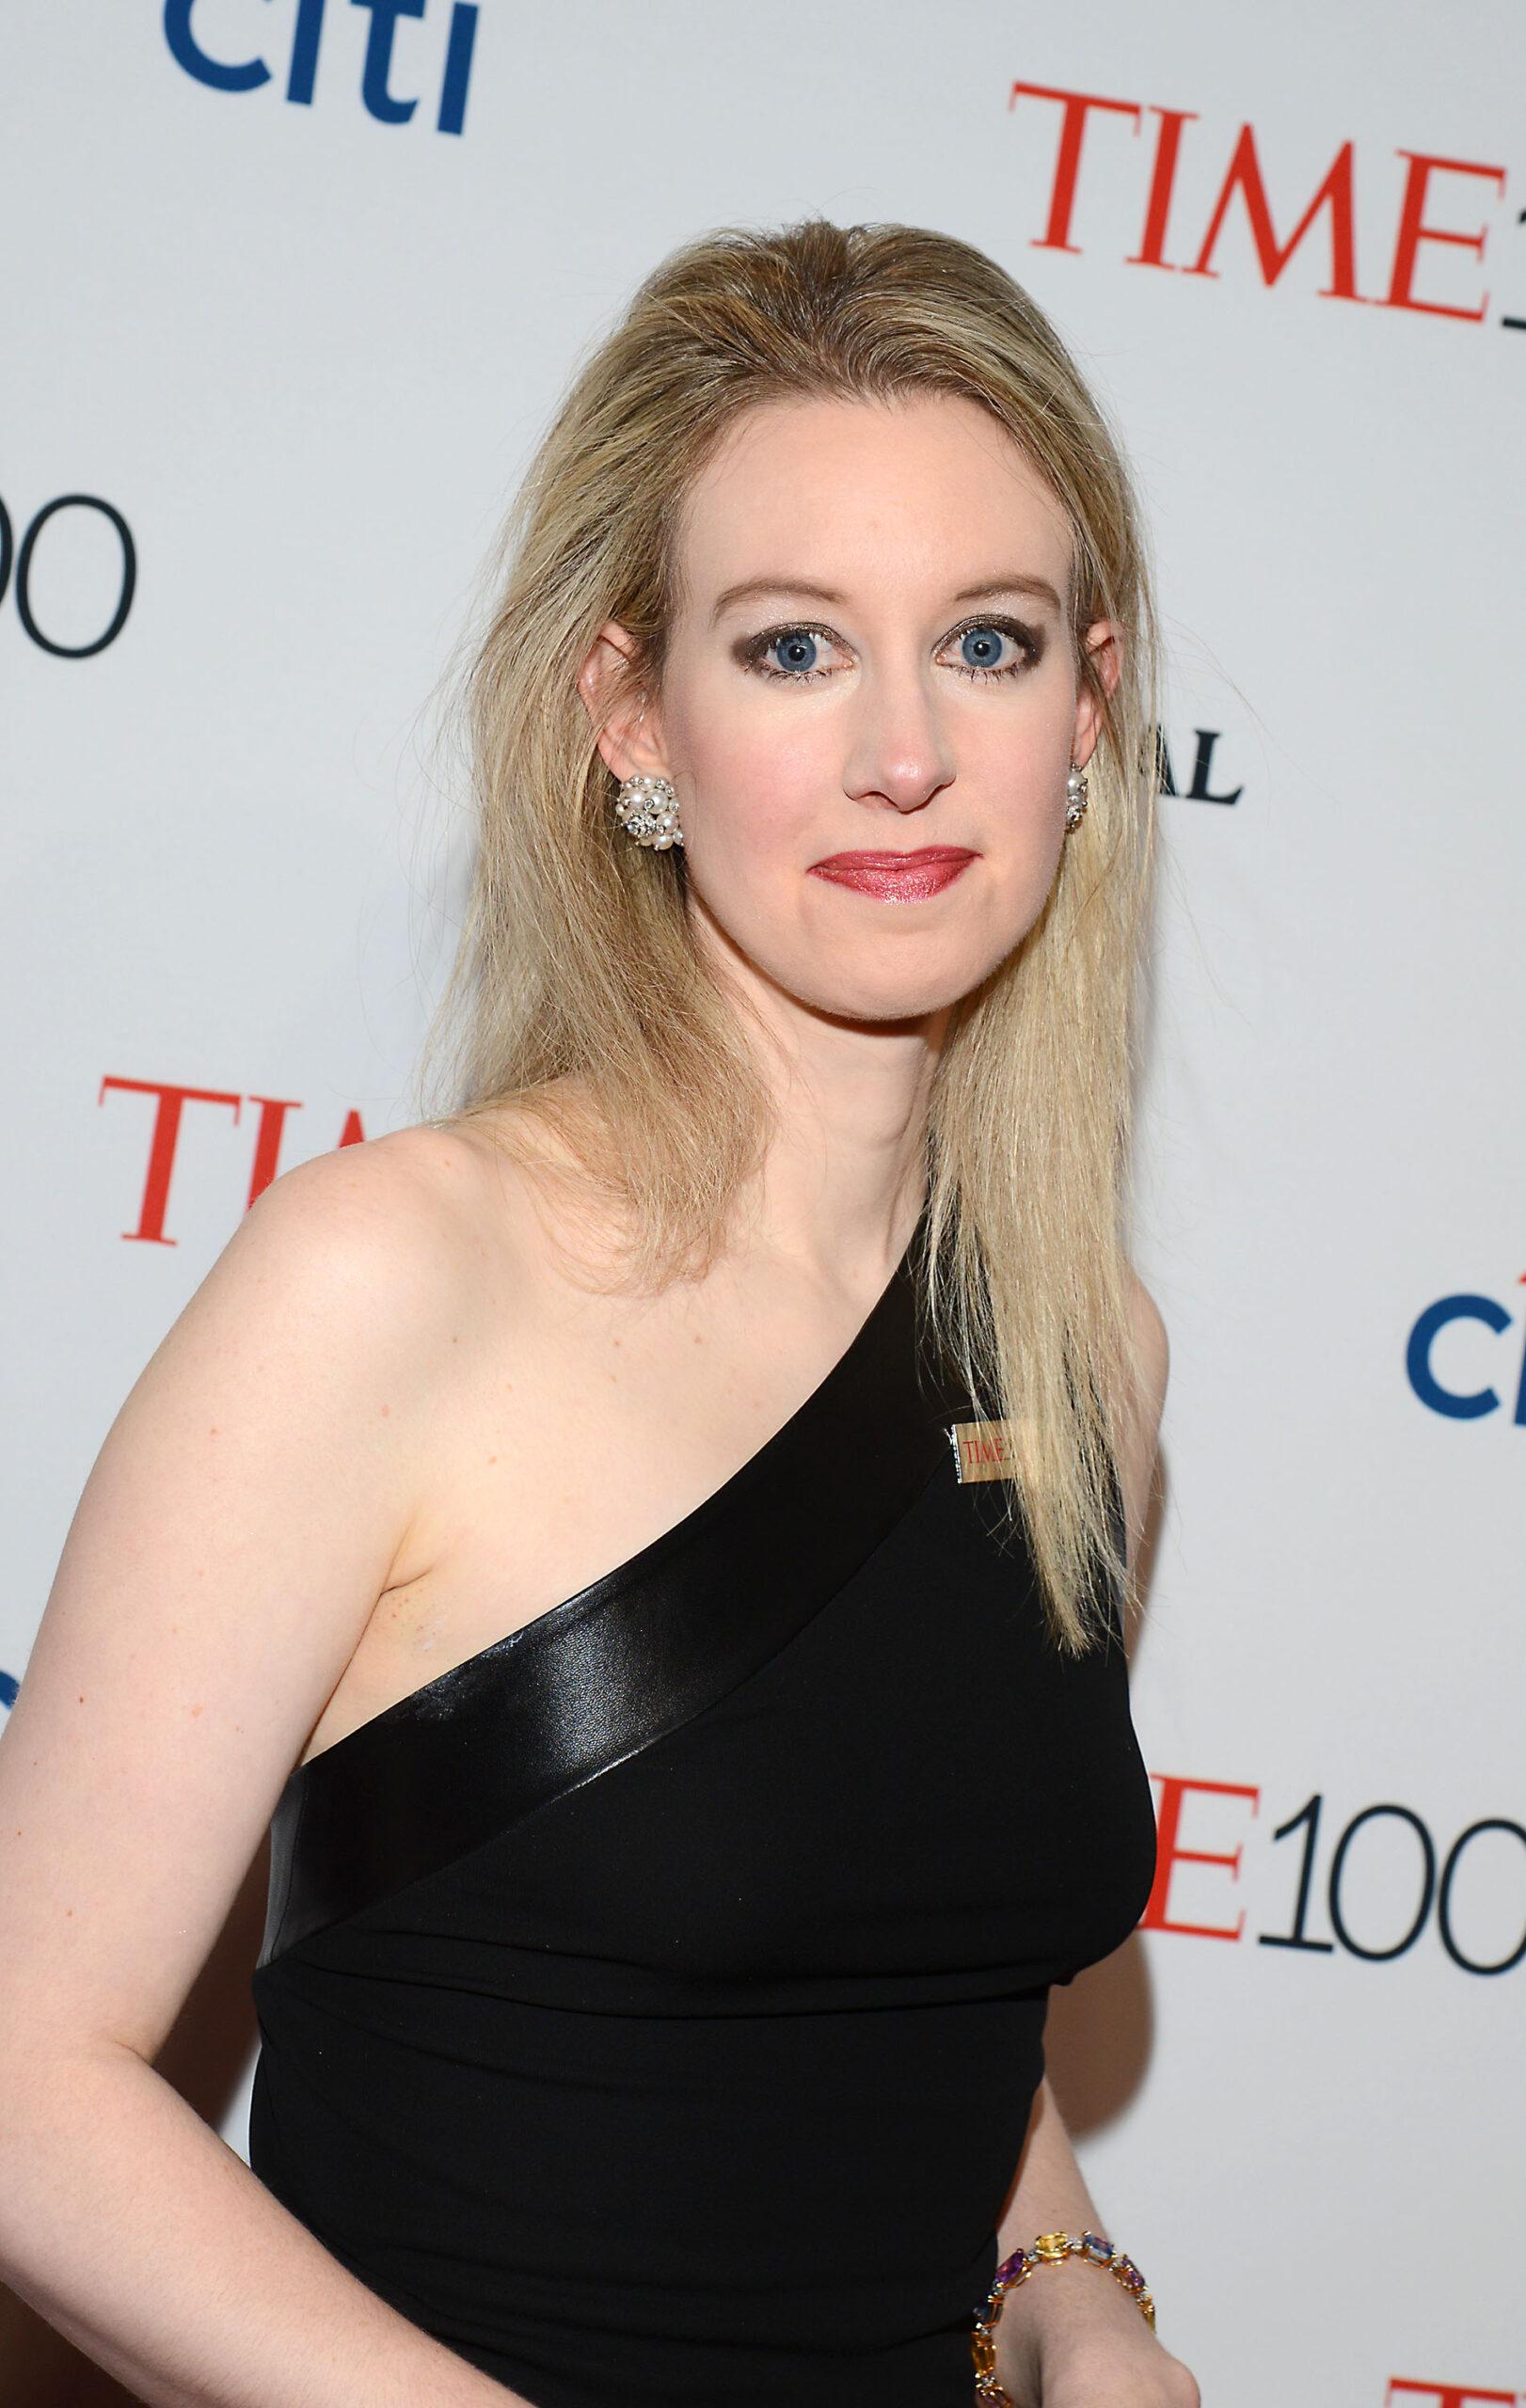 Elizabeth Holmes attends the TIME 100 Issue celebrating the 100 Most Influential People in the World 